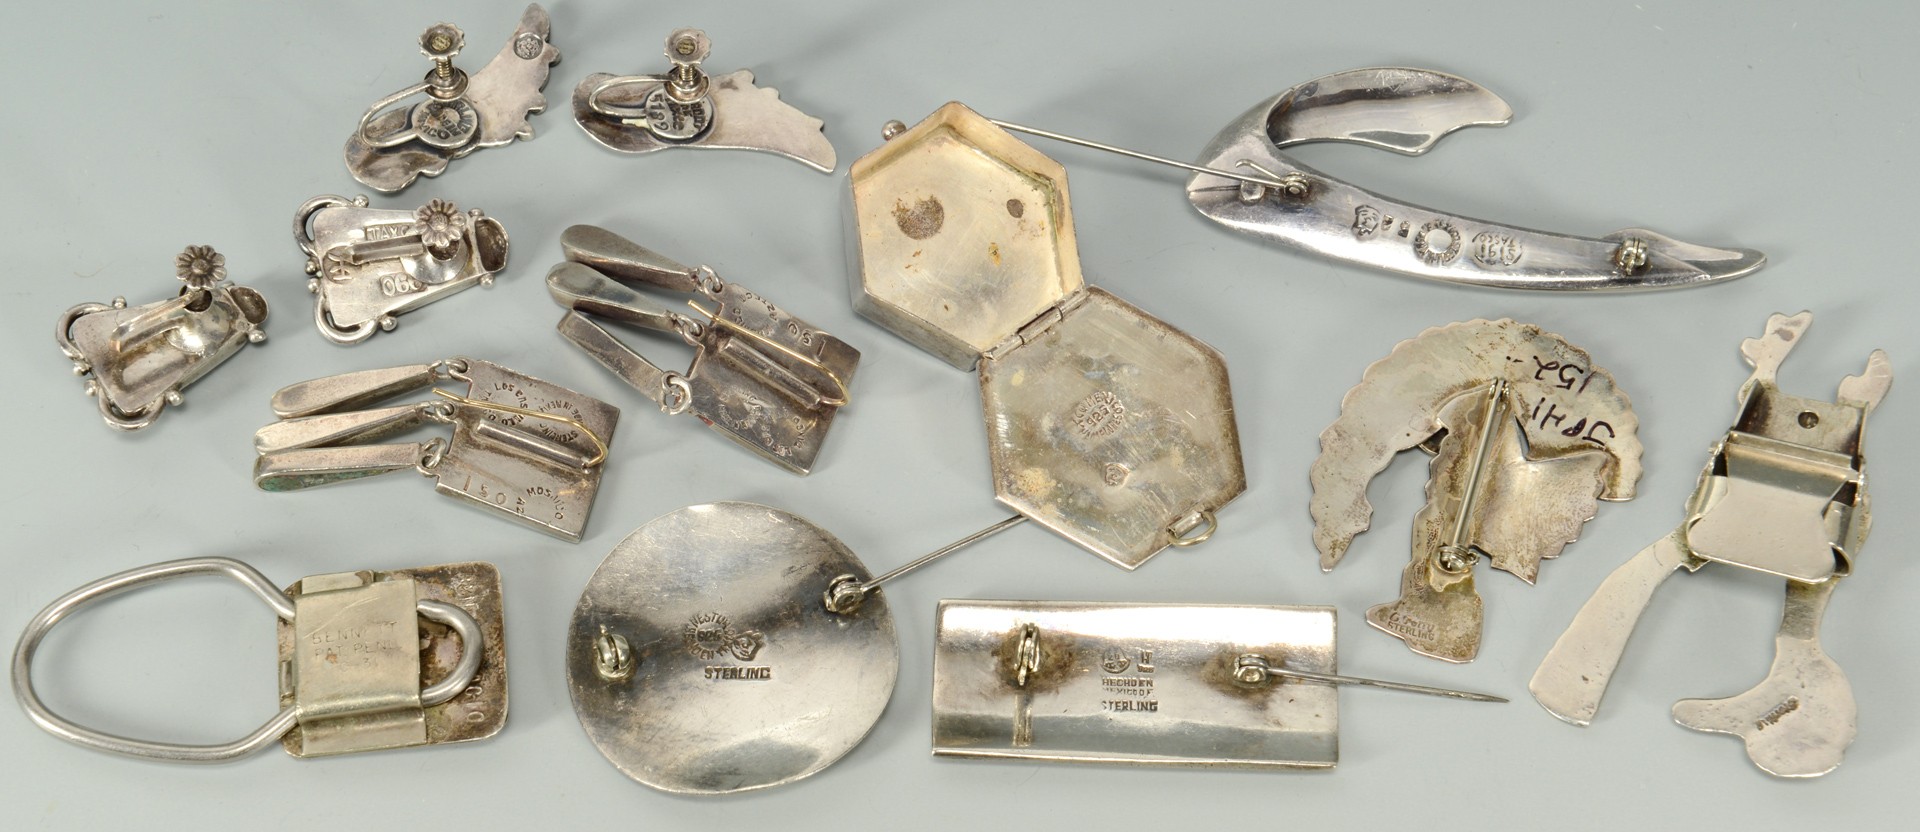 Lot 388: Mexican Designer Jewelry w/ SW American Jly